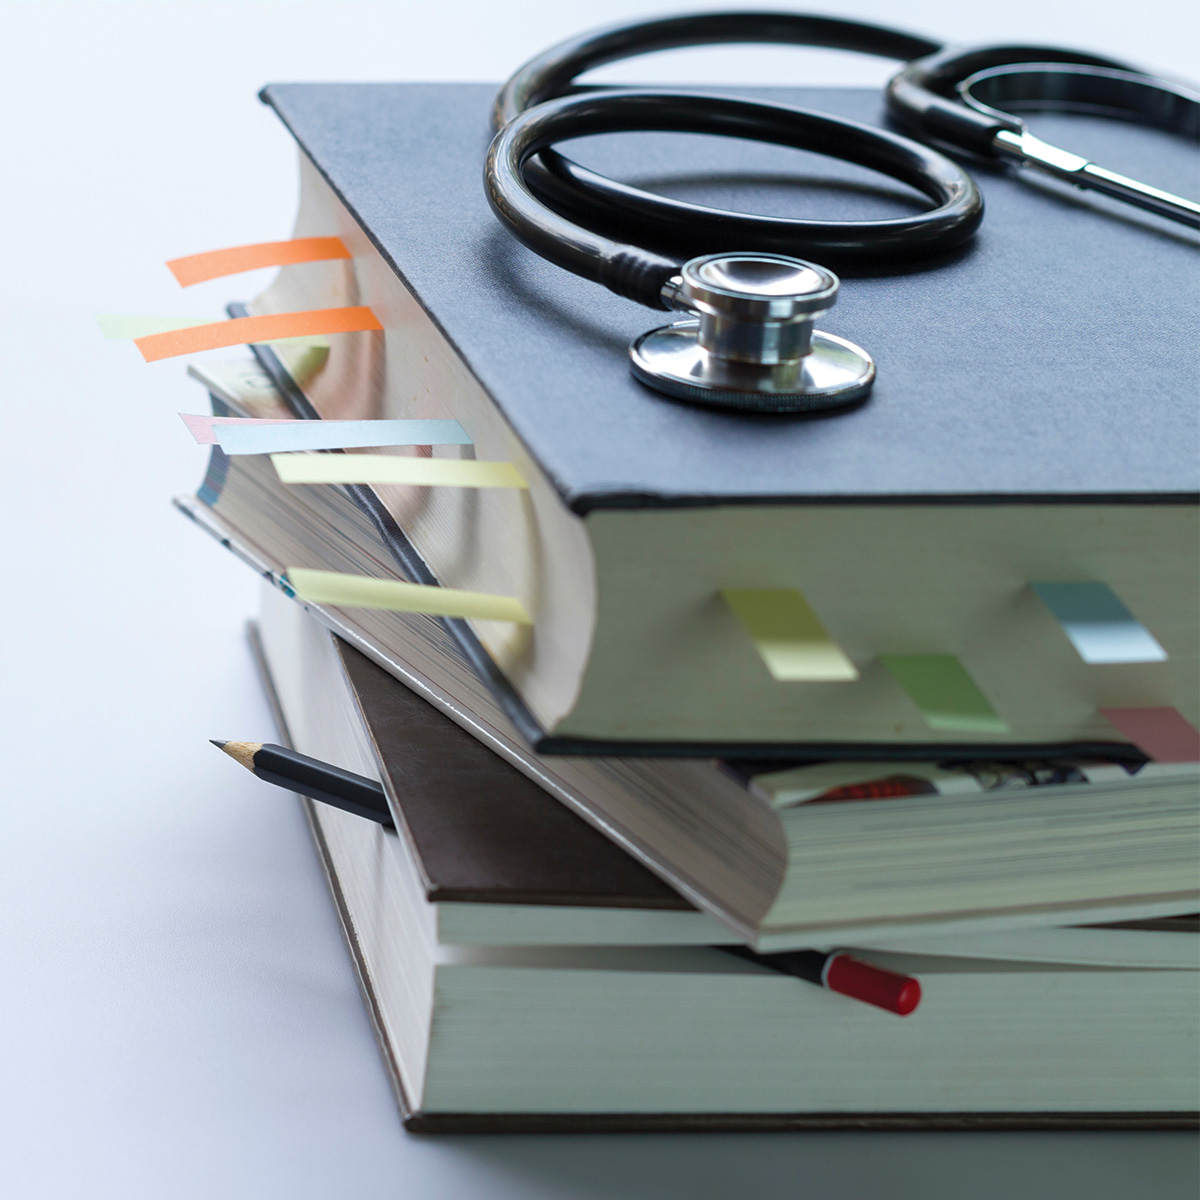 Medical books with various colored tabs and a stethoscope on top.